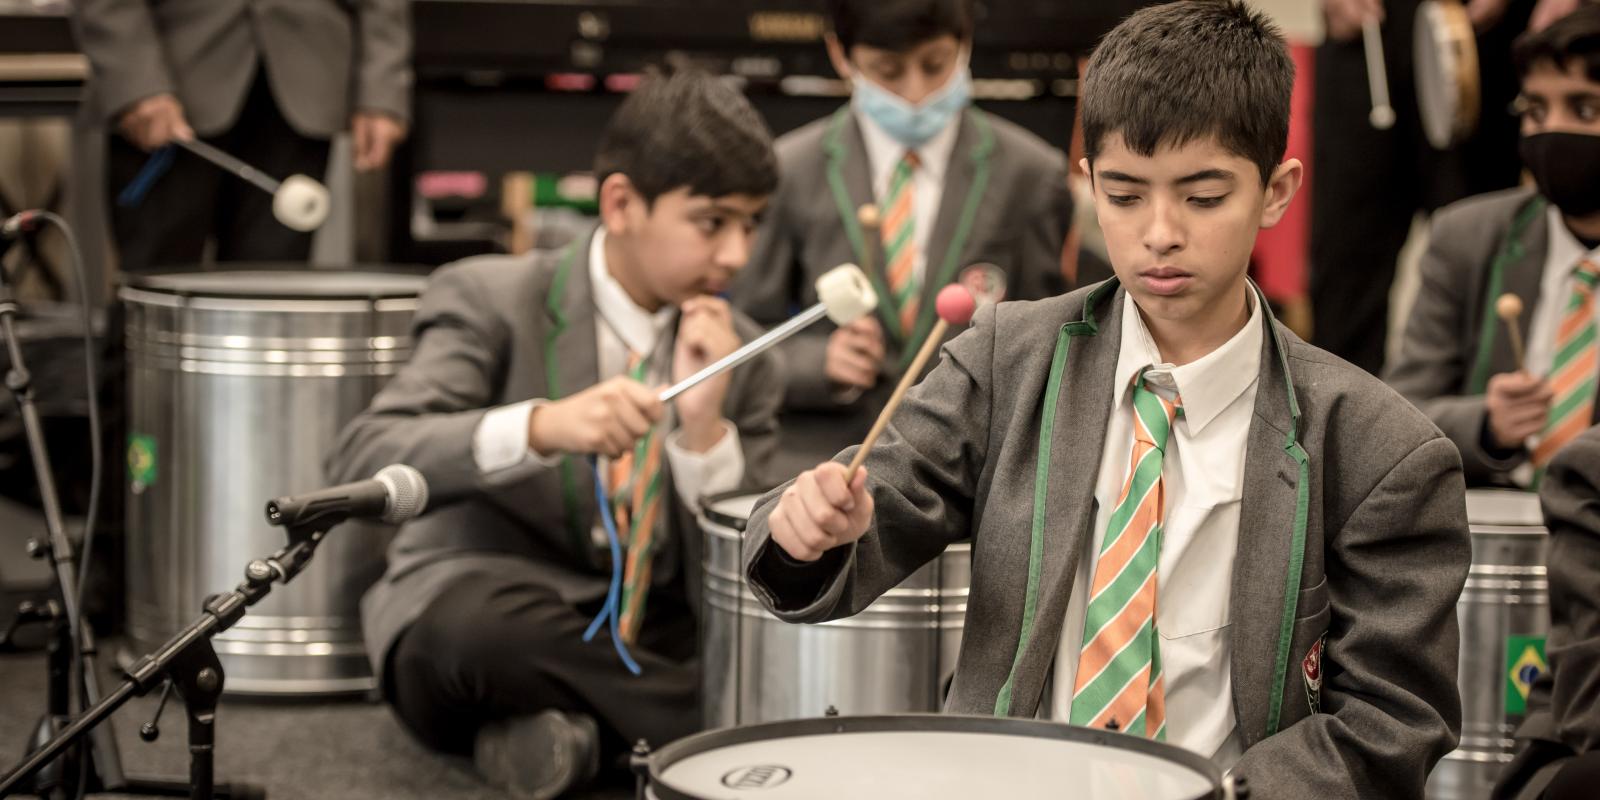 A pupil concentrates on striking a drum